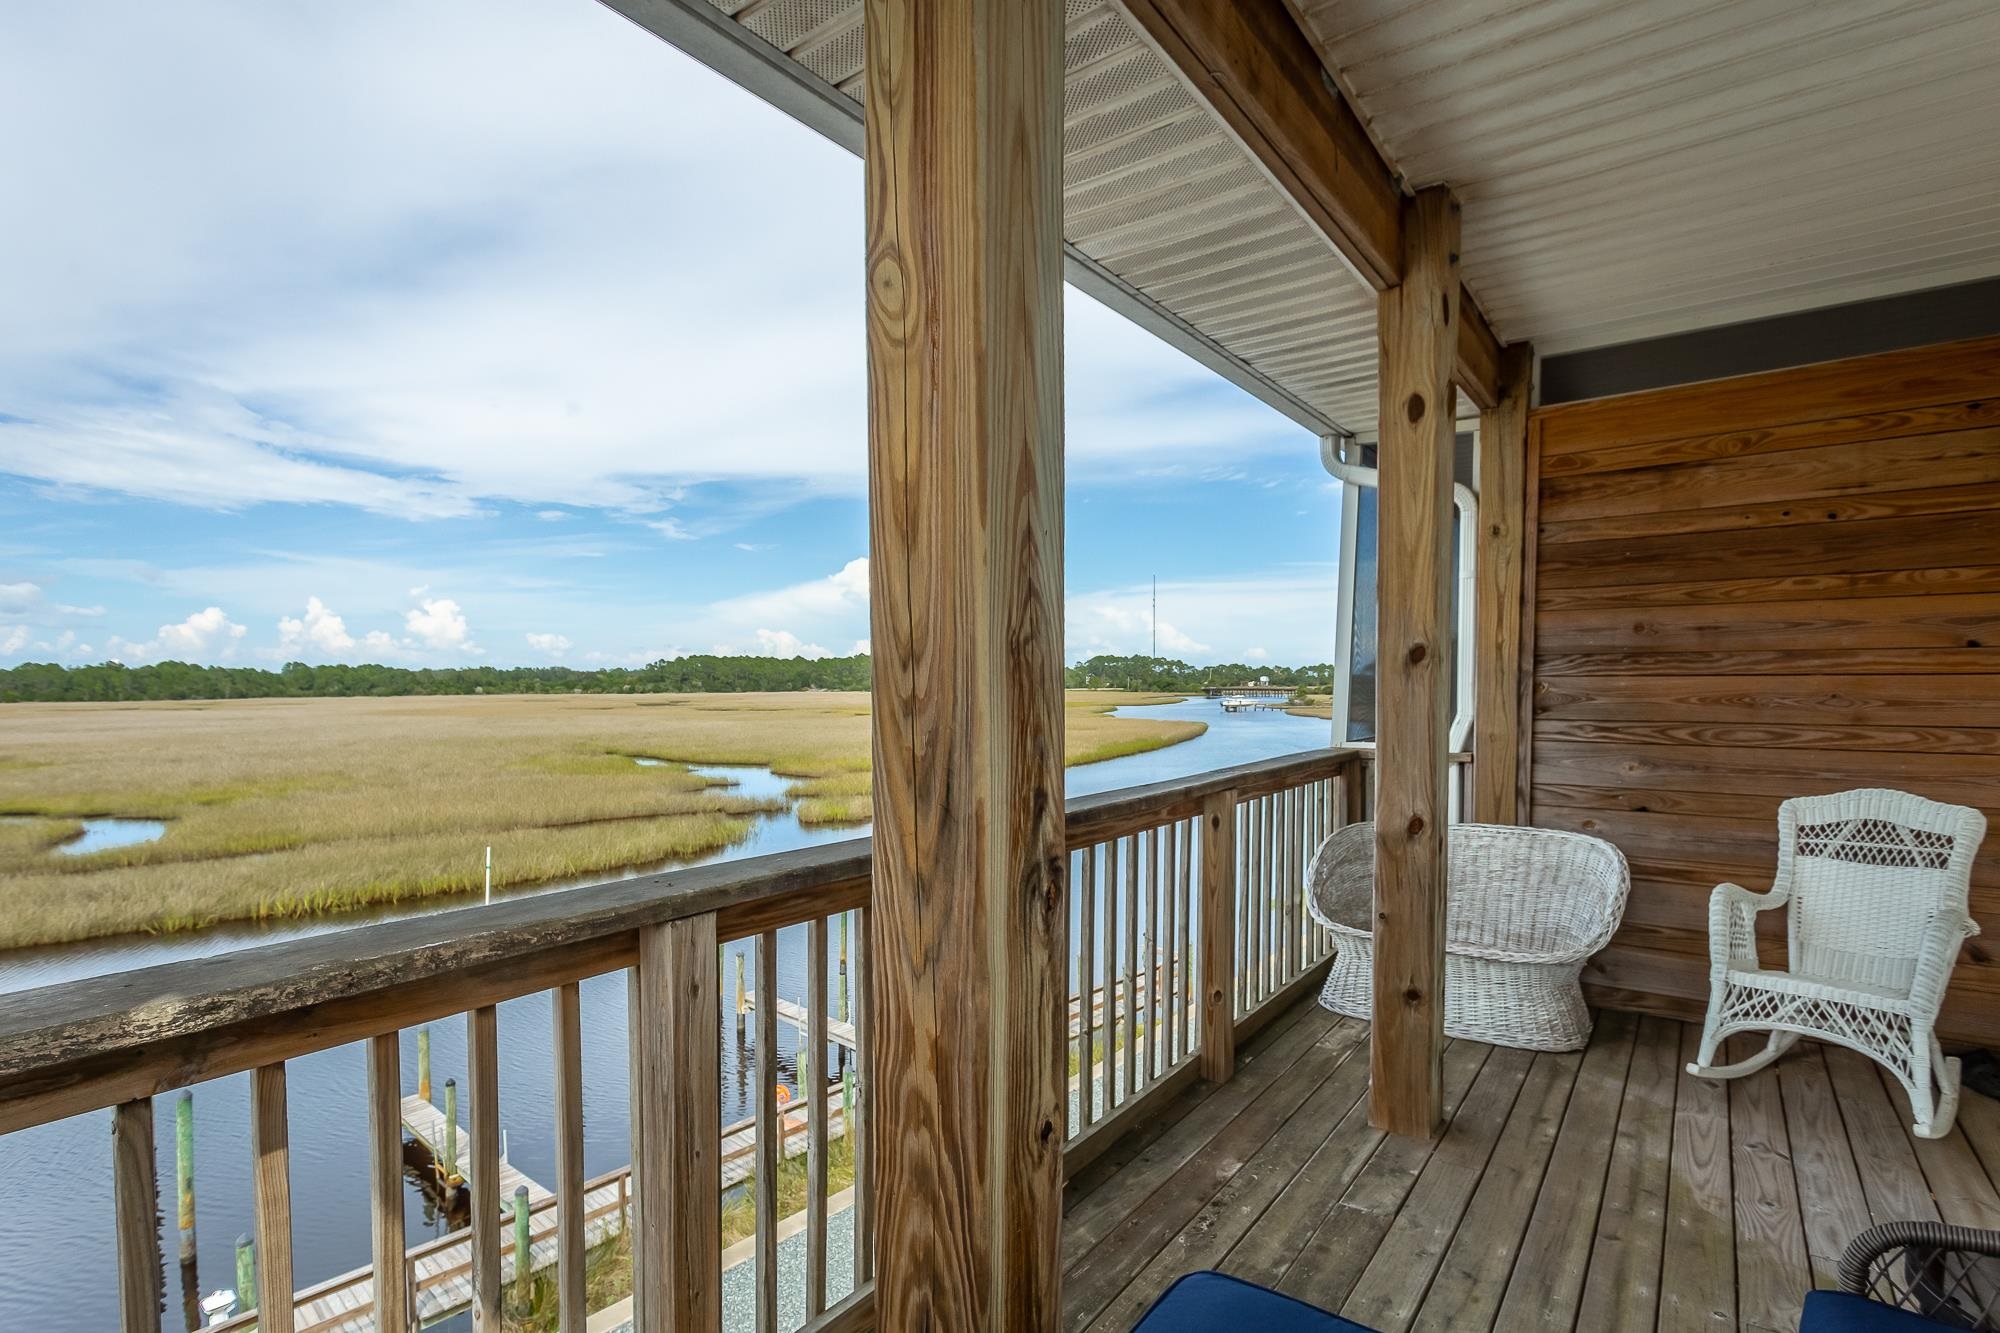 123 Timber Island Road,CARRABELLE,Florida 32322,2 Bedrooms Bedrooms,3 BathroomsBathrooms,Townhouse,123 Timber Island Road,363167